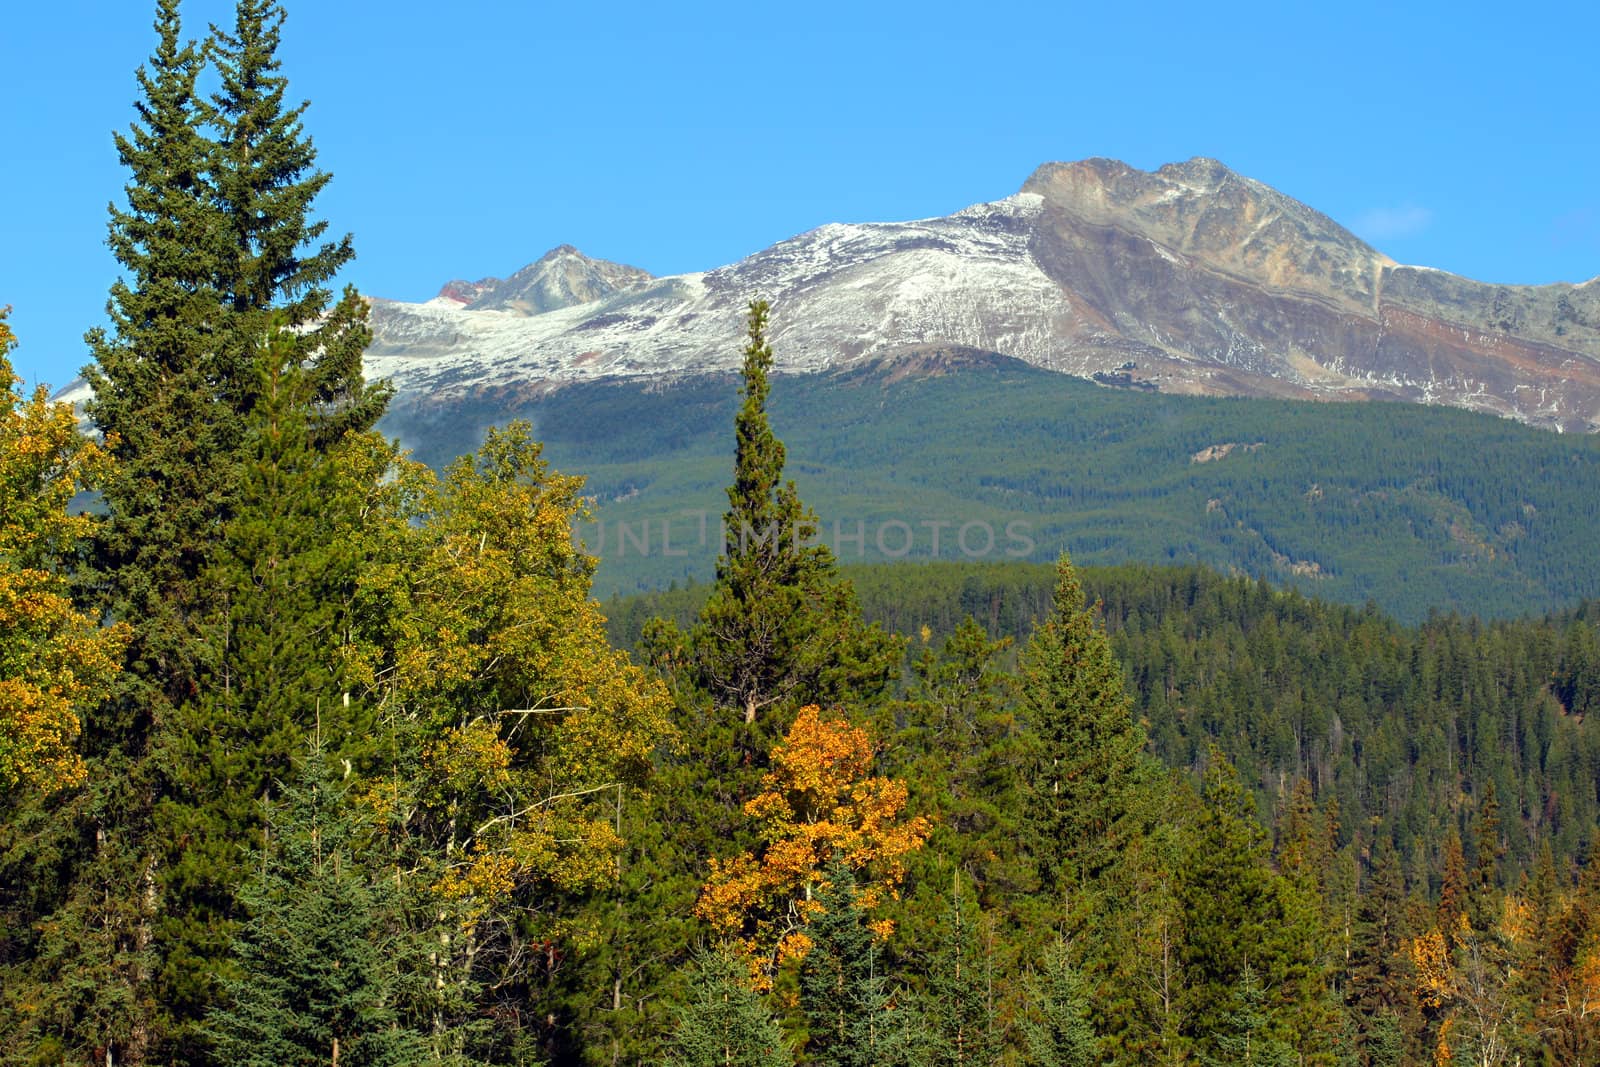 Pyramid Mountain rises high above the forests near the Canadian town of Jasper.